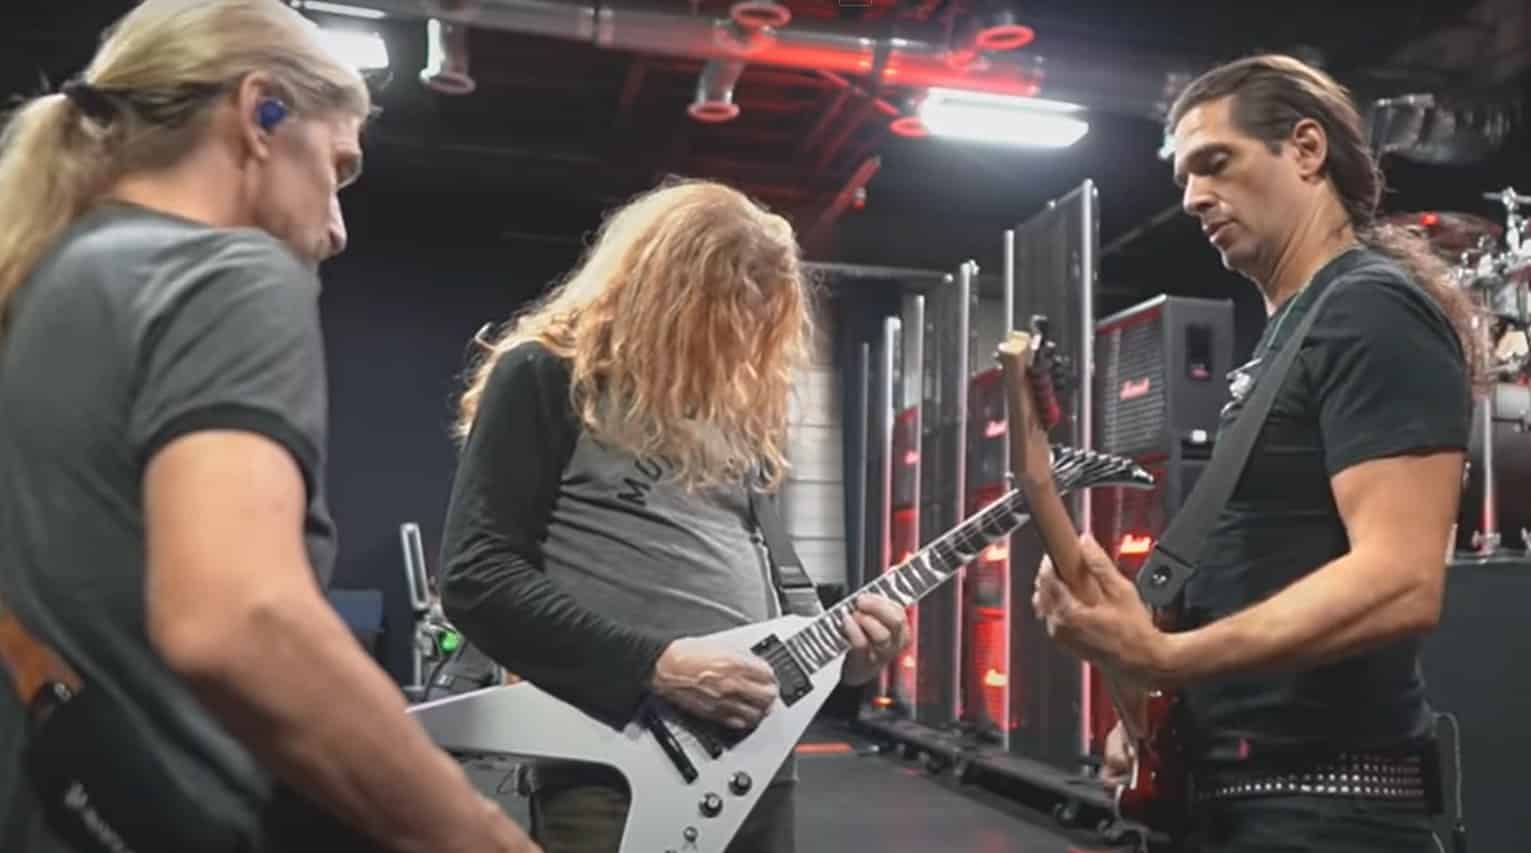 MEGADETH Post Behind-The-Scenes Rehearsal Of ‘Symphony Of Destruction,’ ‘Hangar 18,’ And ‘Conquer Or Die’